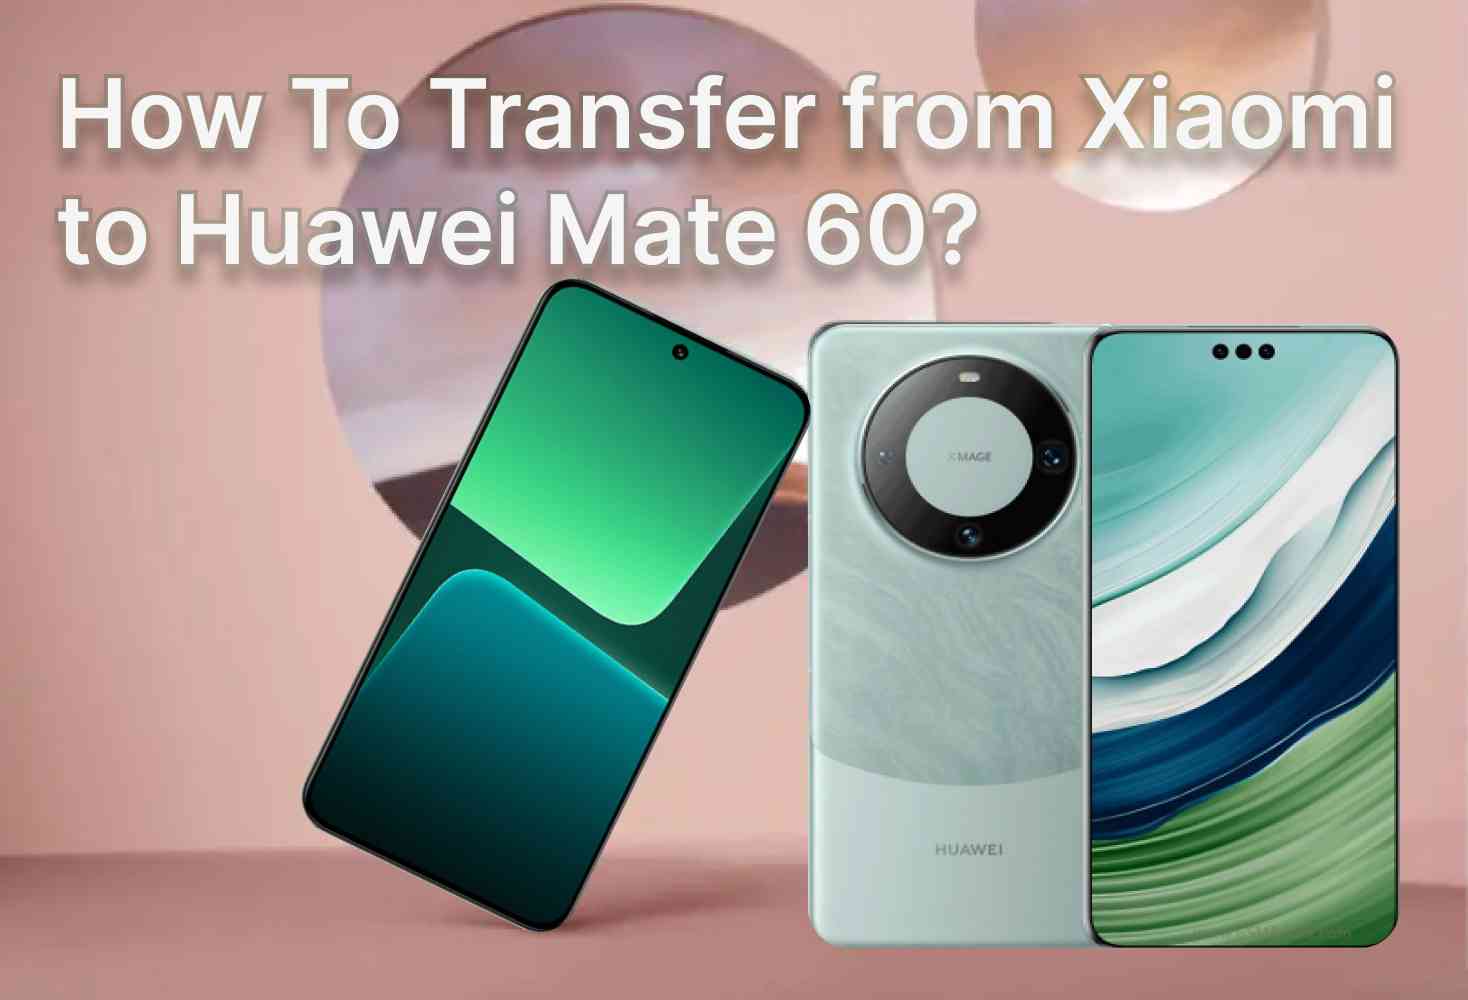 How To Transfer from Xiaomi to Huawei Mate 60?